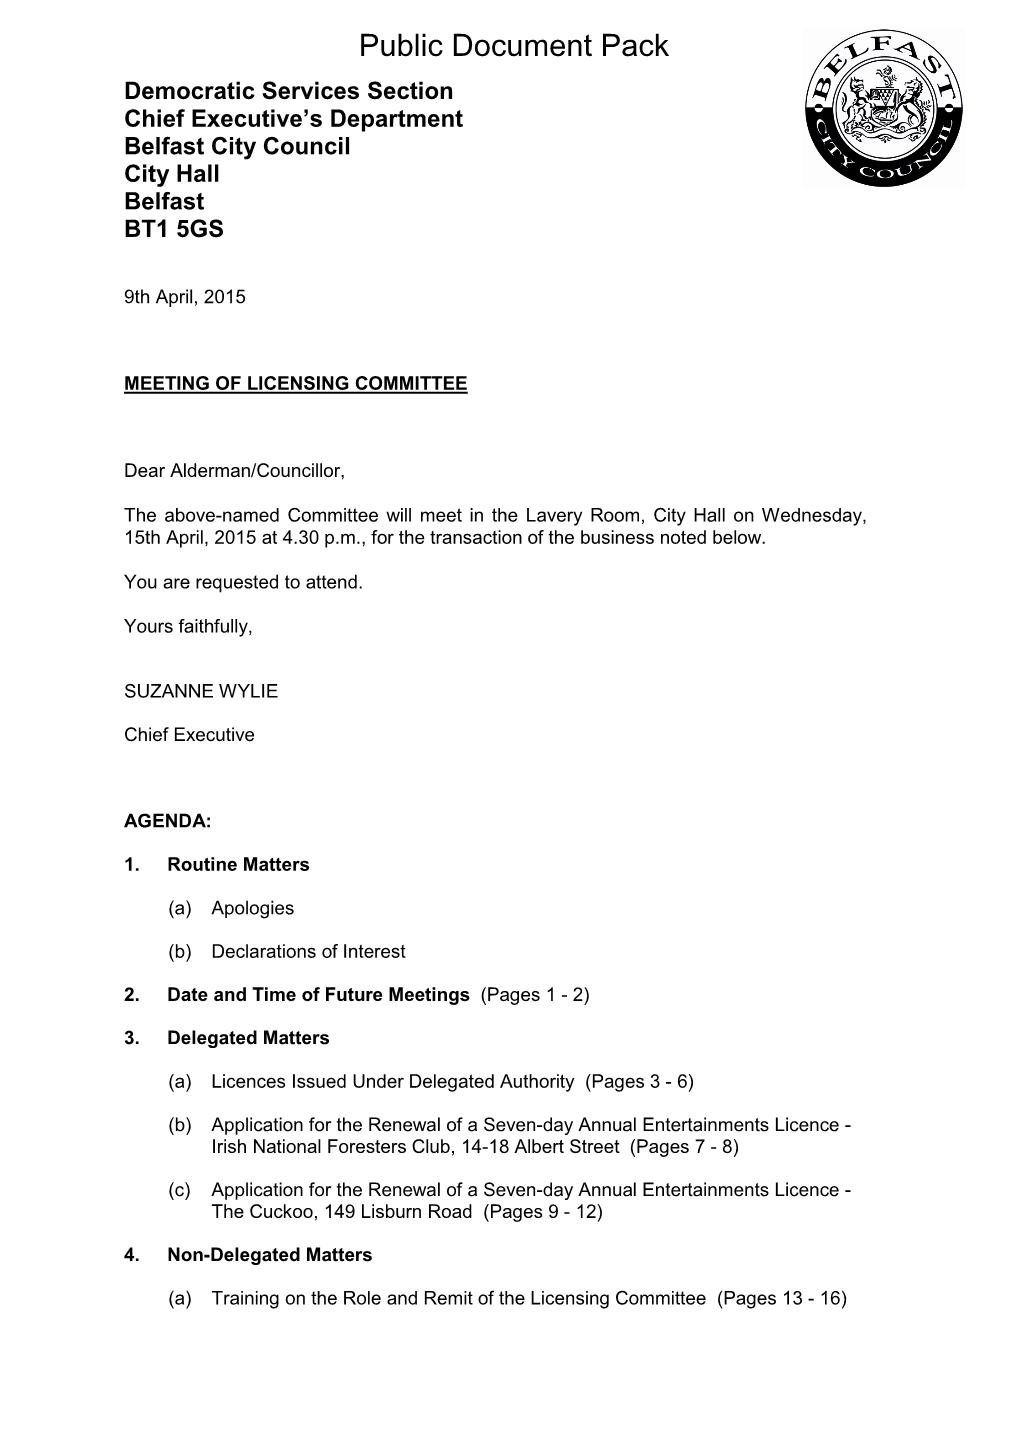 (Public Pack)Agenda Document for Licensing Committee, 15/04/2015 16:30